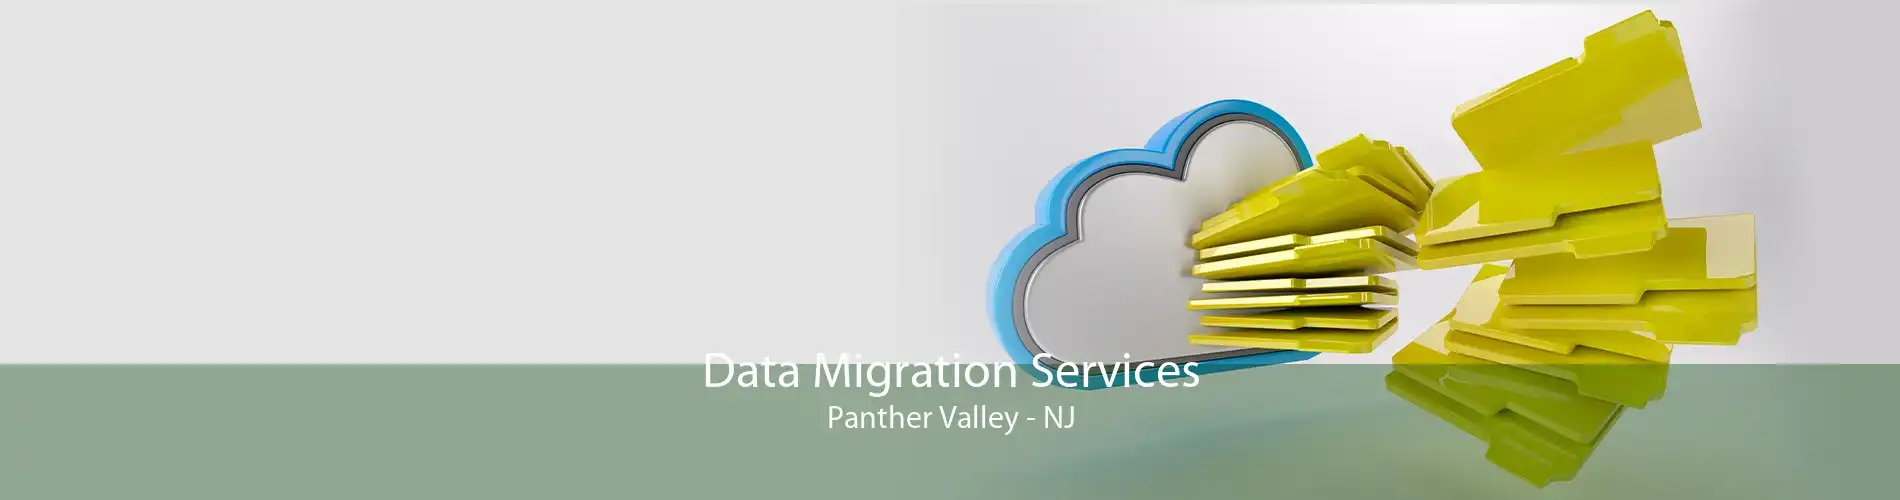 Data Migration Services Panther Valley - NJ